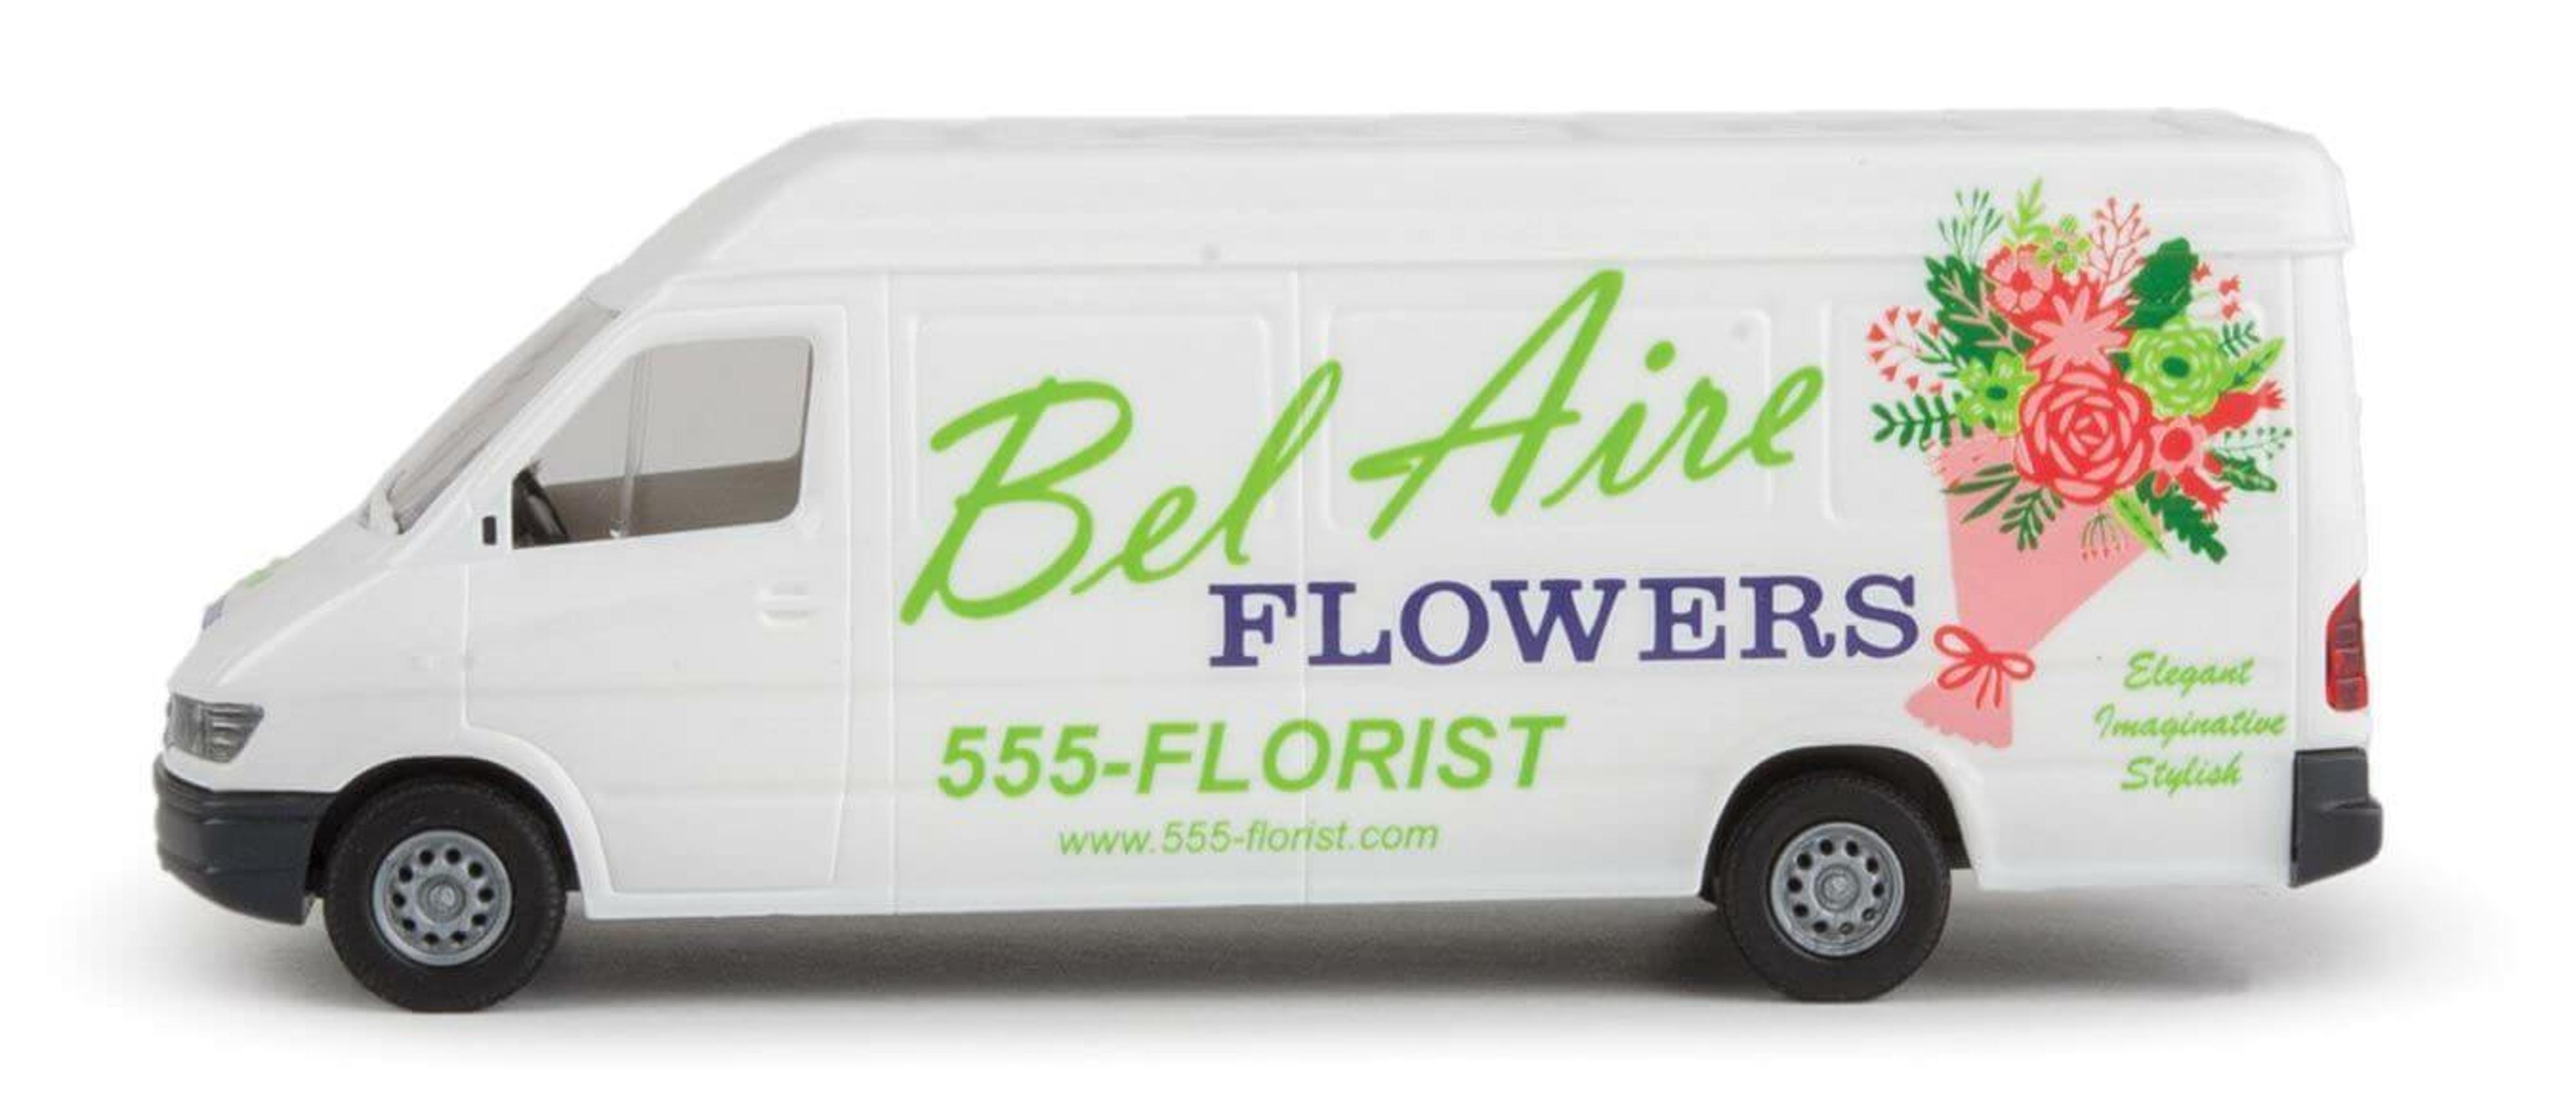 Walthers HO Delivery Van - Bel Aire Flowers